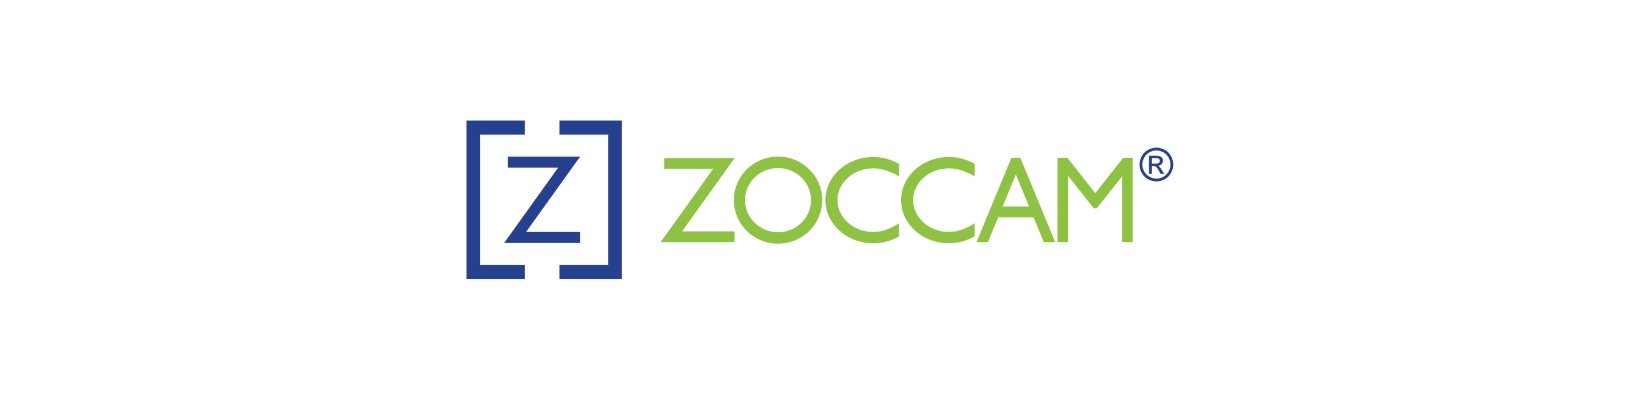   98% of real estate agents find manual delivery of funds is the worst part of a transaction. With the ZOCCAM platform, they don’t have to worry. This app allows you to securely send funds &amp; documents, as well as authenticate the borrower’s ident